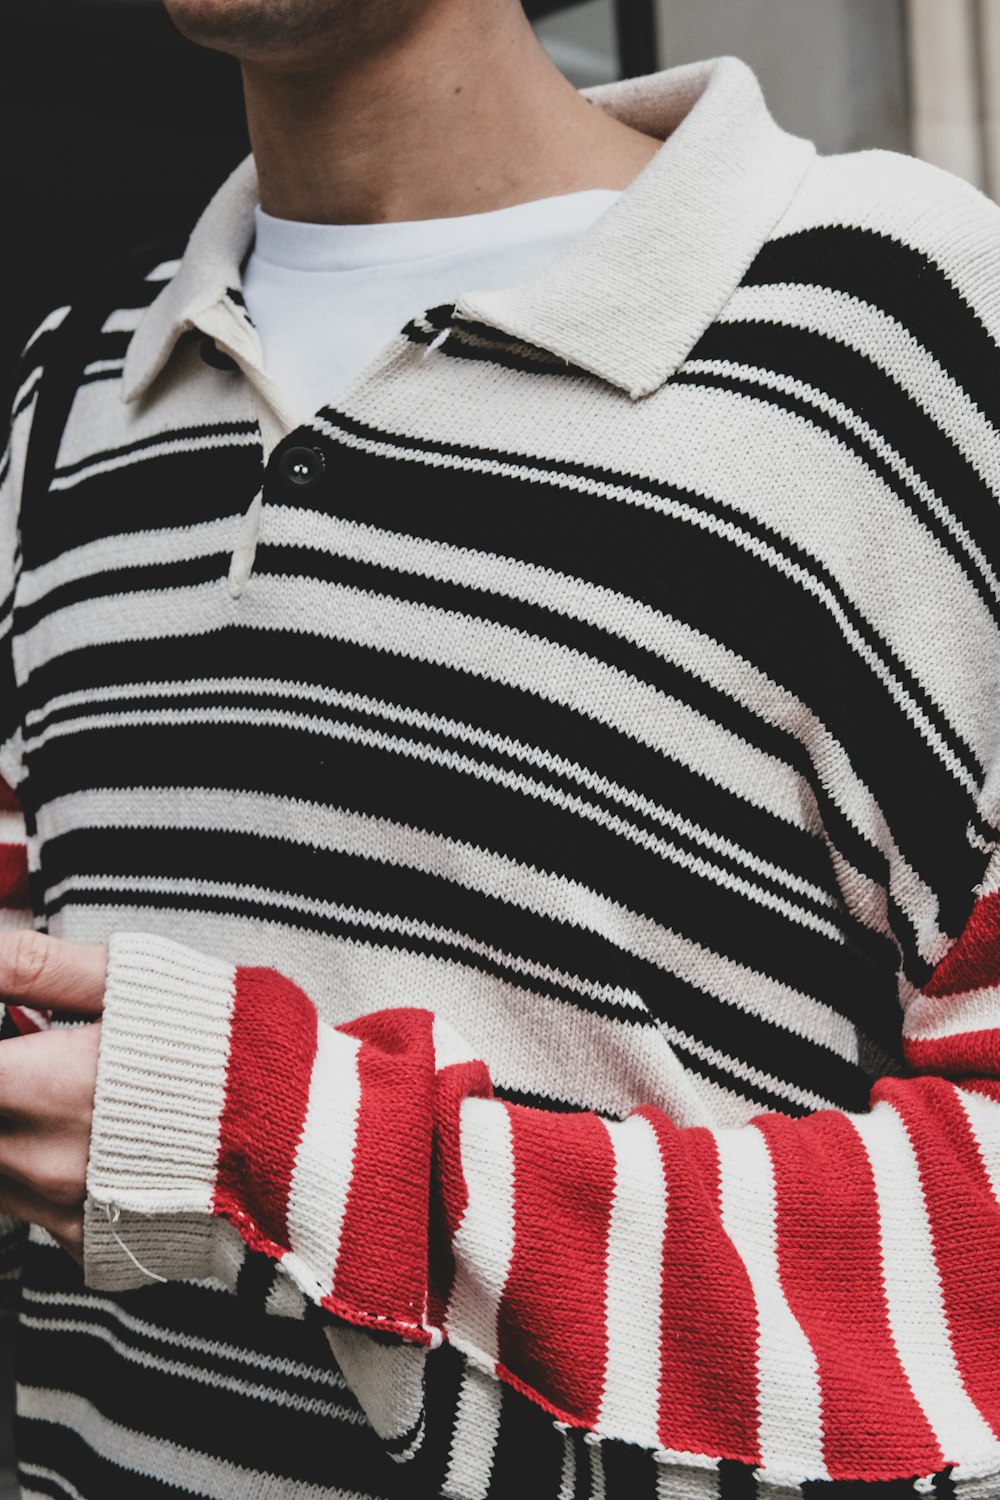 a man wearing a striped sweater and a white shirt